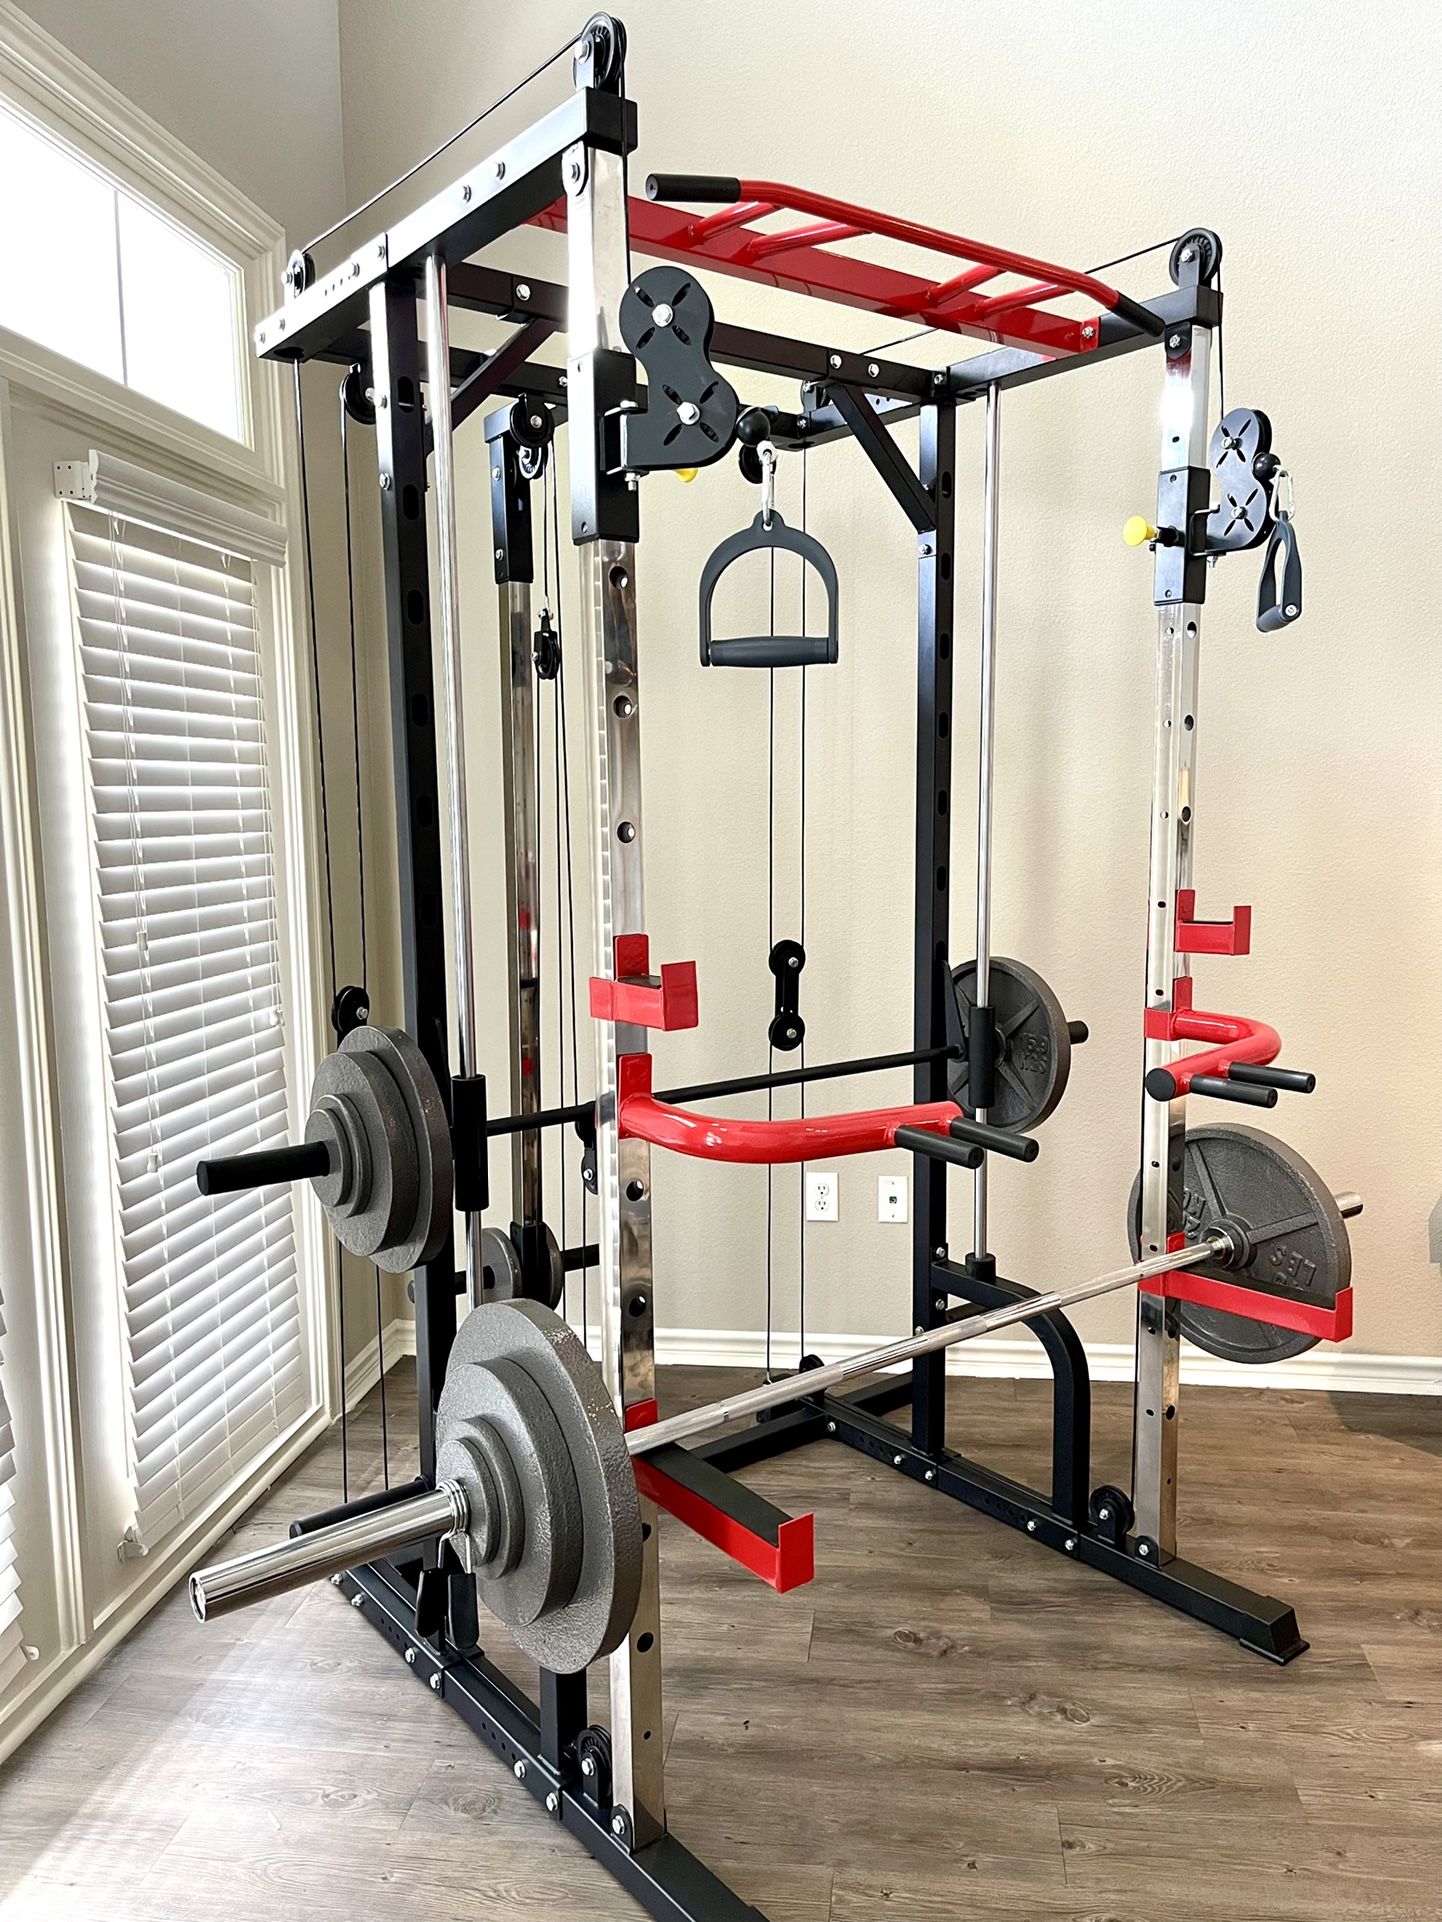 WEIGHTS INCLUDED  💥 FREE DELIVERY 💪 LLERO A20 Smith Machine / Home Gym 💥 Brand NEW In BOX 📦 Free Delivery  ✅ Save $800 OFF Retail !!!